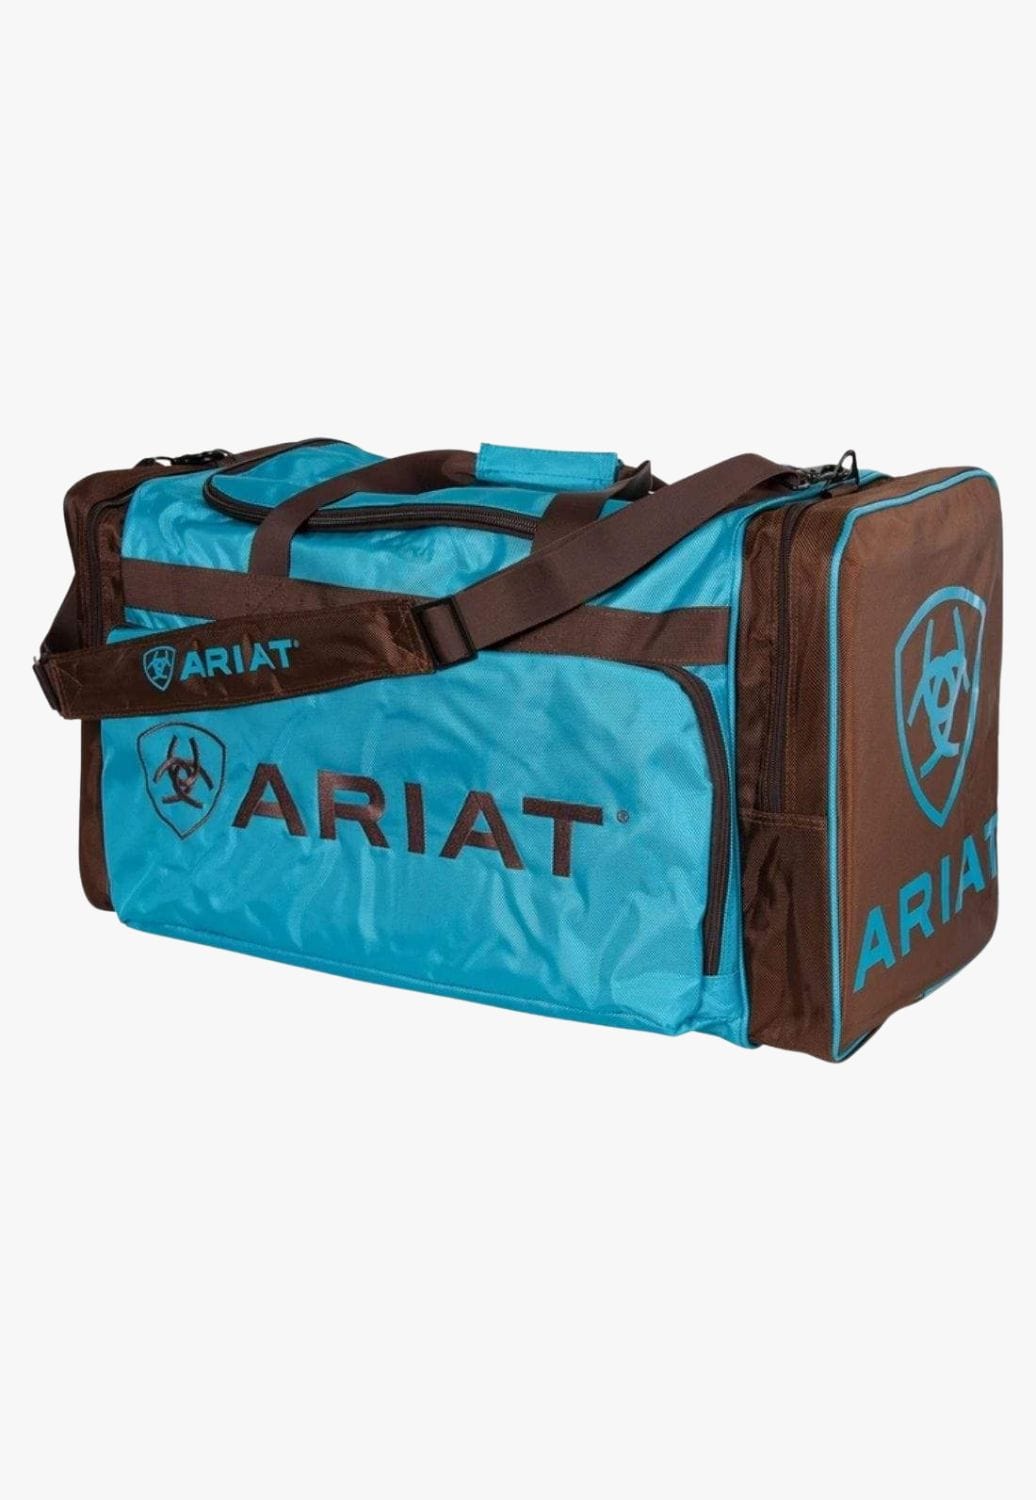 Ariat TRAVEL - Travel Bags Turquoise/Brown Ariat Gear Bag